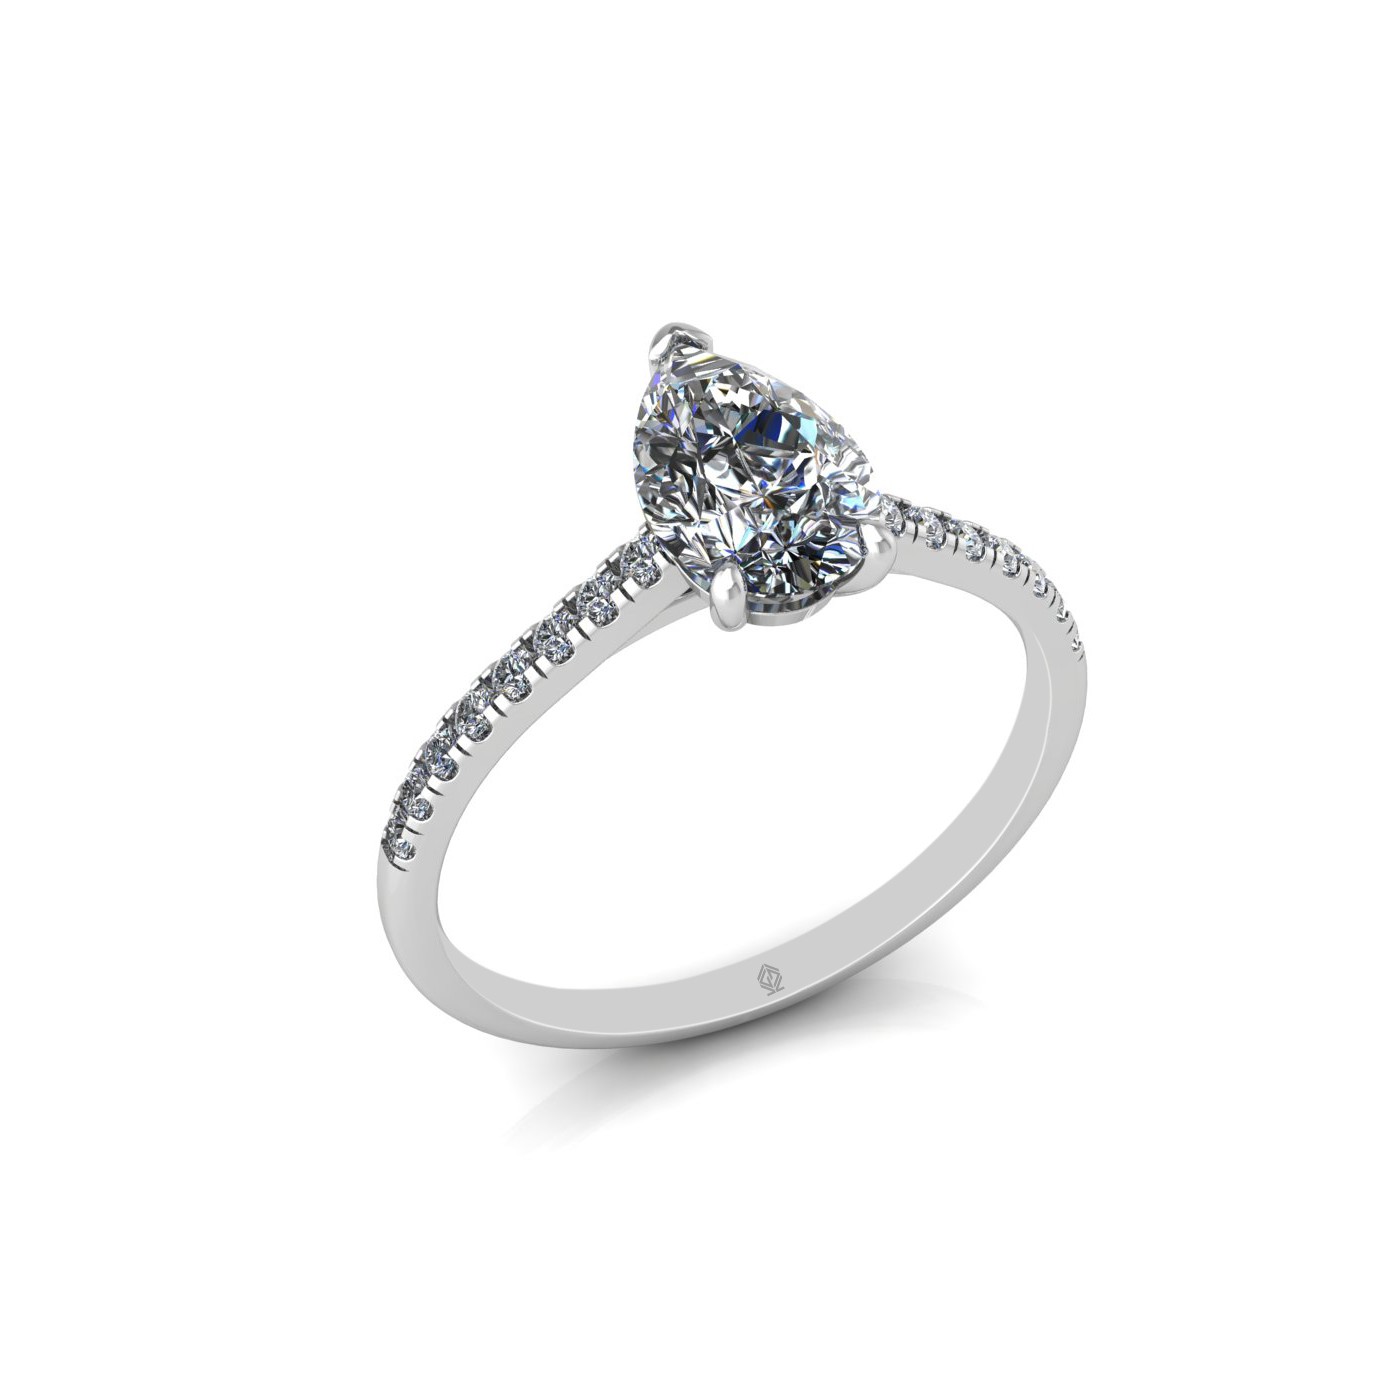 18k white gold 1.0ct 3 prongs pear diamond engagement ring with whisper thin pavÉ set band